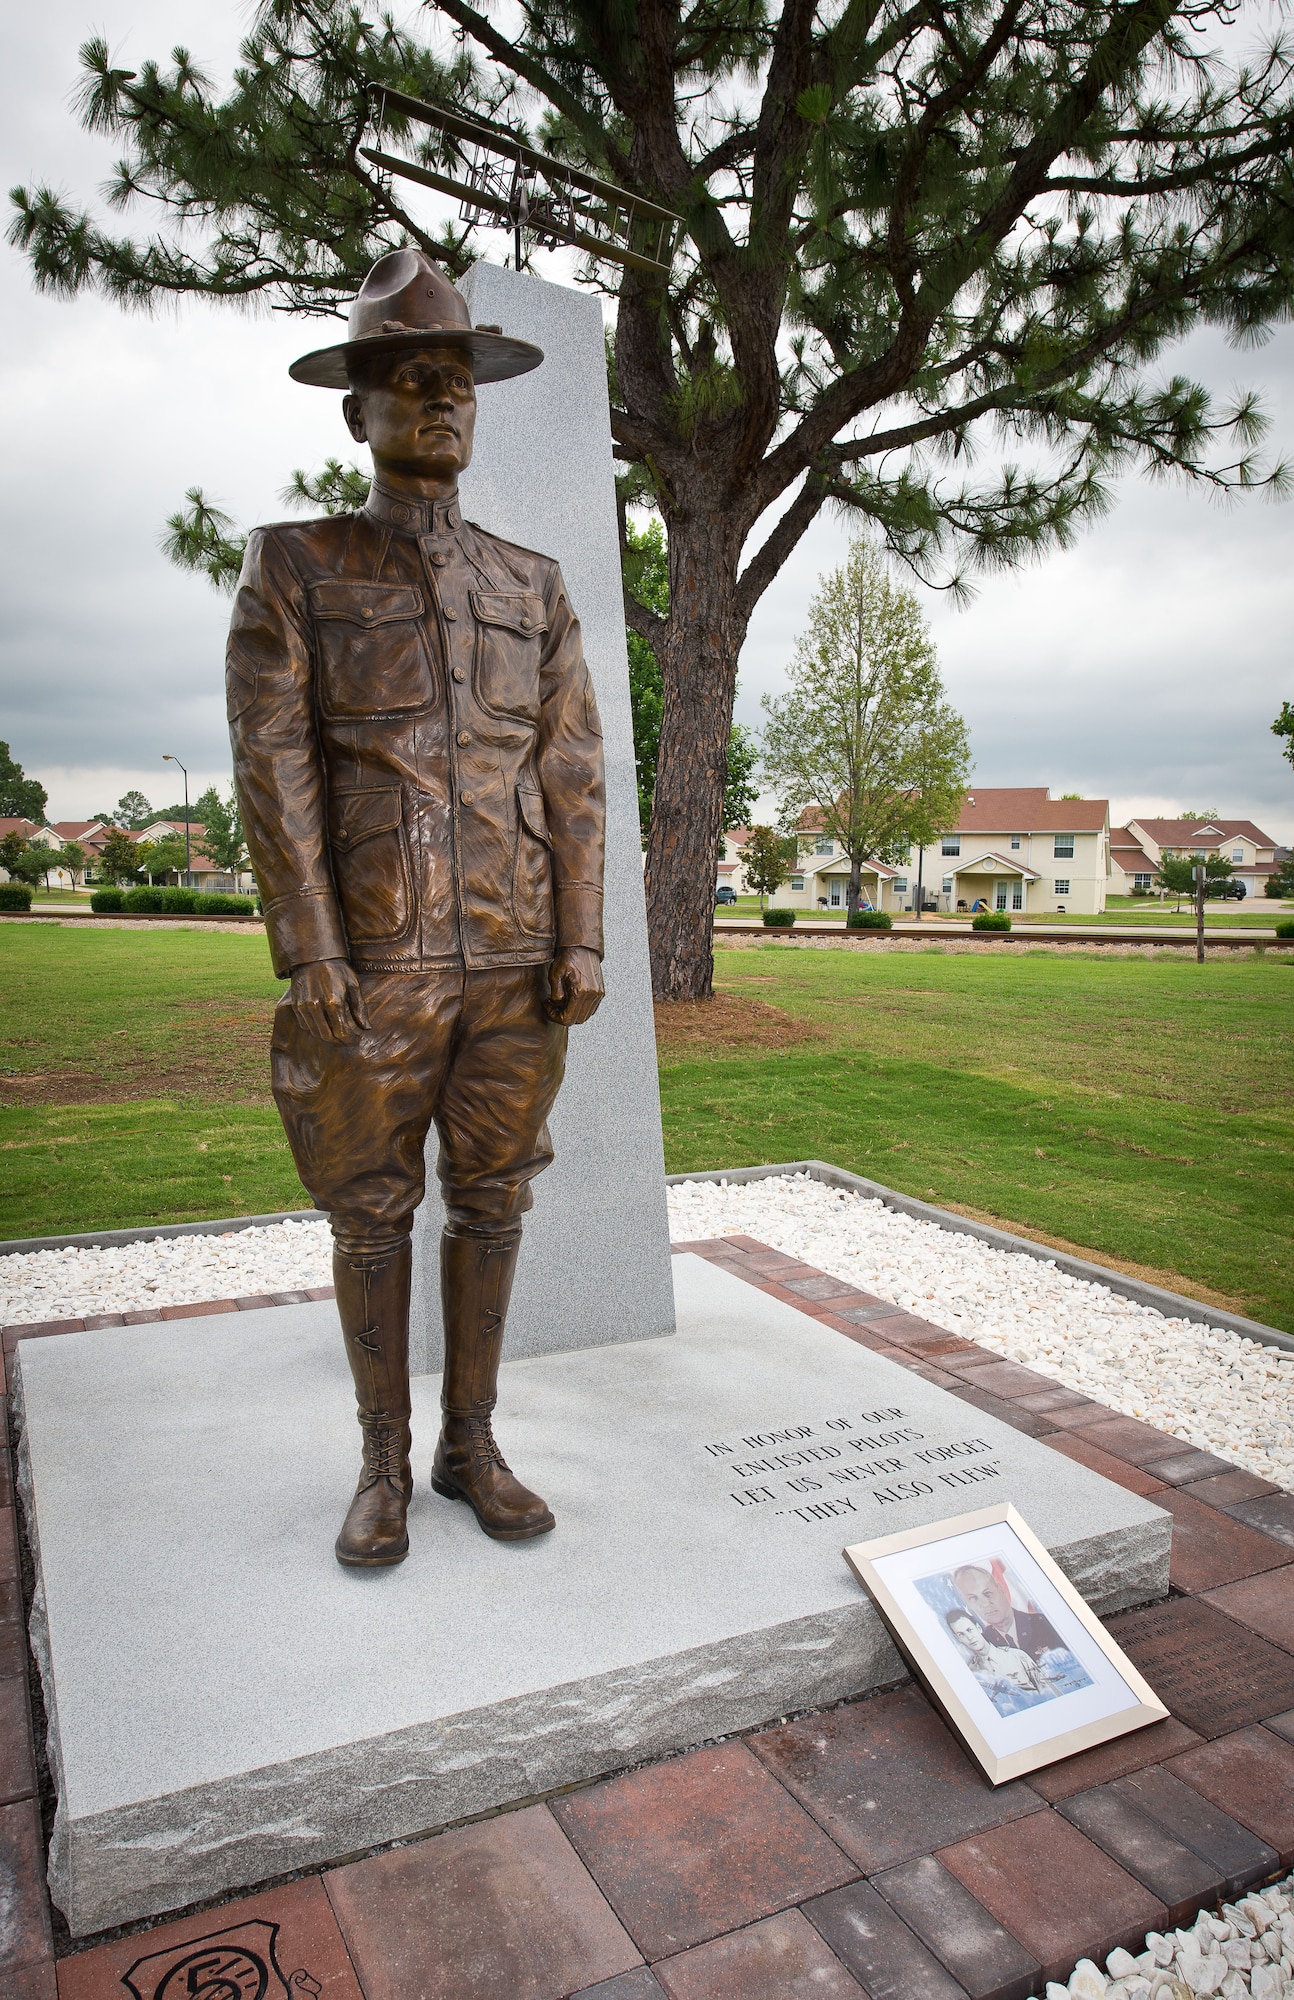 A new monument honoring the nearly 3,000 enlisted sergeant pilots who served from 1912-1957 was unveiled during a ceromony June 9, 2014, at the Enlisted Heritage Hall at Maxwell-Gunter Air Force Base. The monument depicts Cpl. Vernon L. Burge, the first enlisted pilot in military aviation, and recognizes the acomplishments of the enlisted fliers who came after him. (U.S. Air Force photo by Donna Burnett)